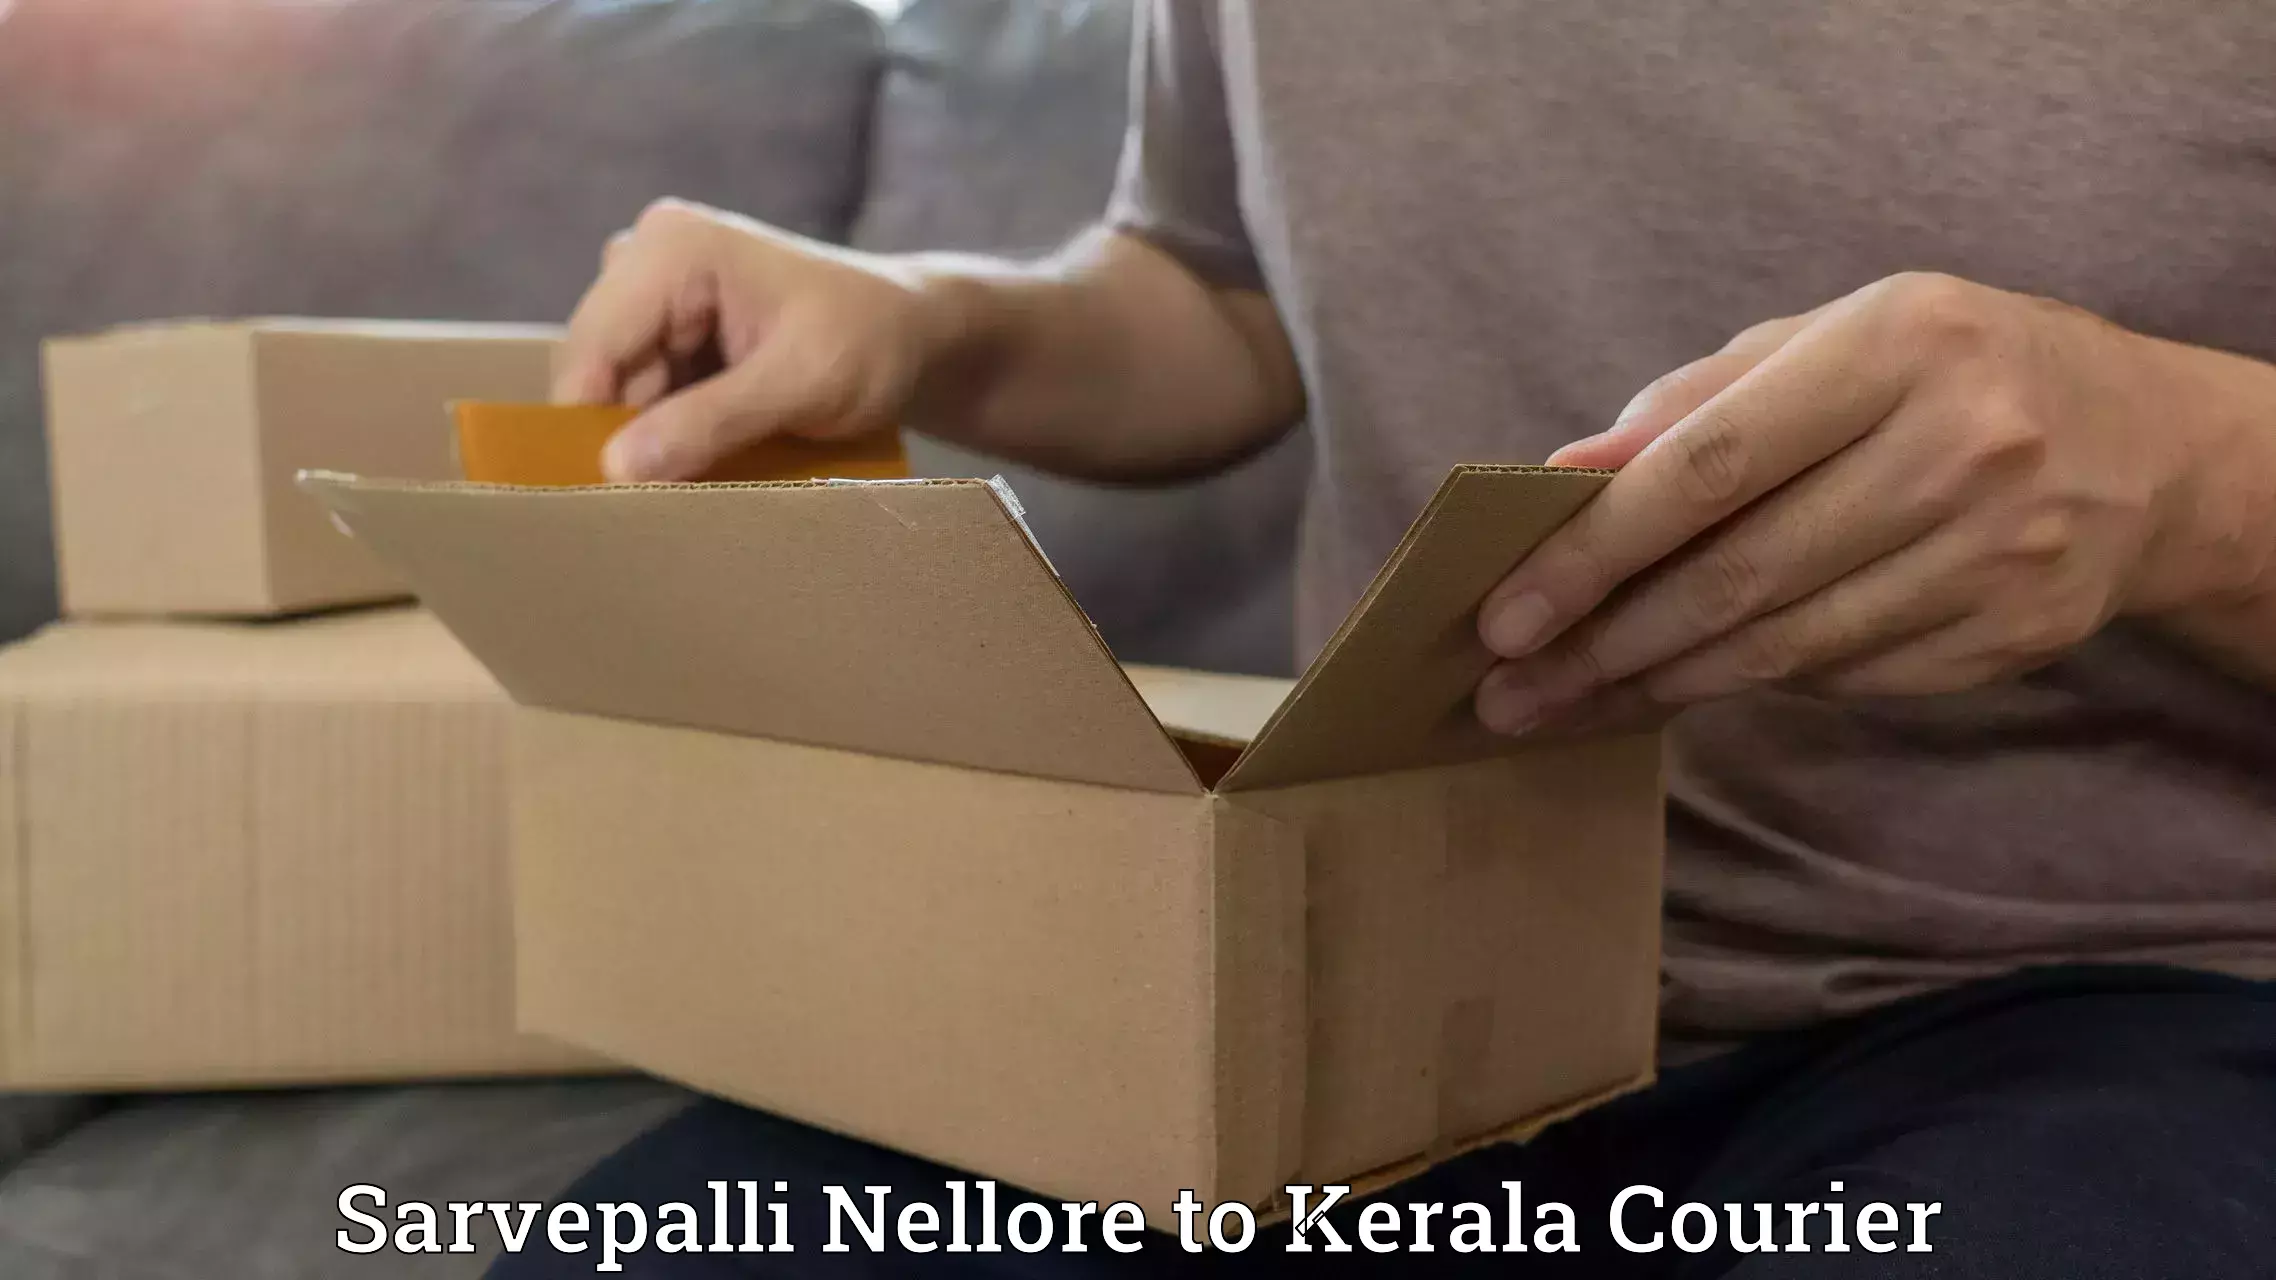 Courier service booking Sarvepalli Nellore to Cochin University of Science and Technology